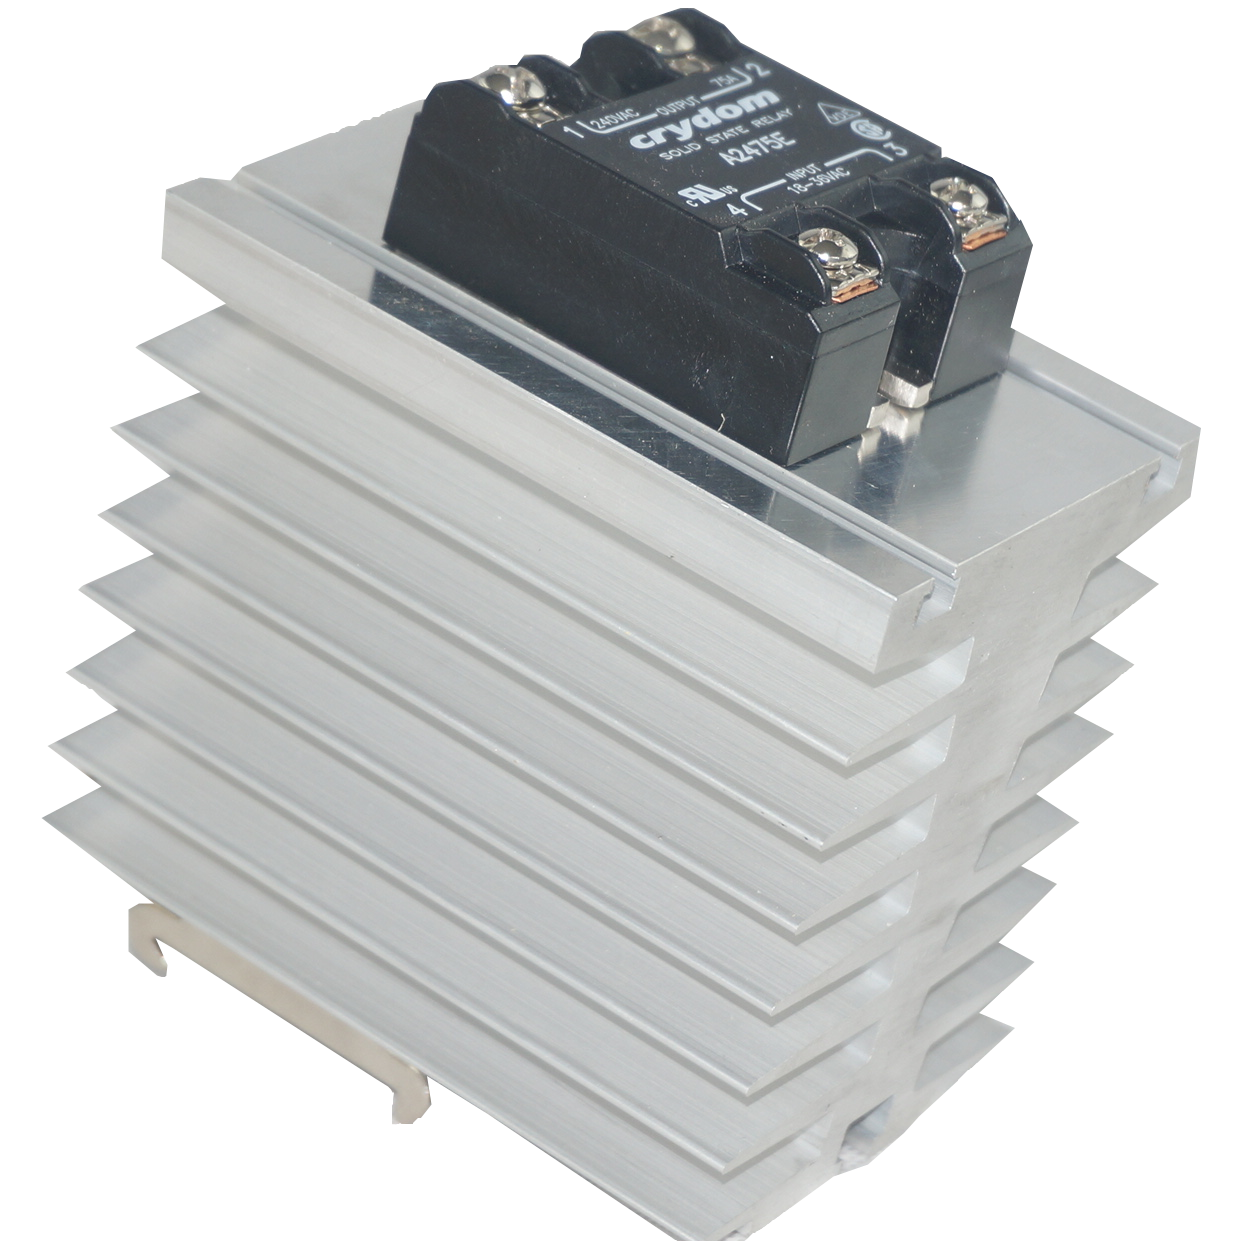 GFIN/100M-DR  + HD6050-10, Din Rail Mount Solid State Relay with Heatsink, Random Crossing, 4-32VDC Control Input, 48-660VAC Output, 50 Amps @ 40 Deg C ambient